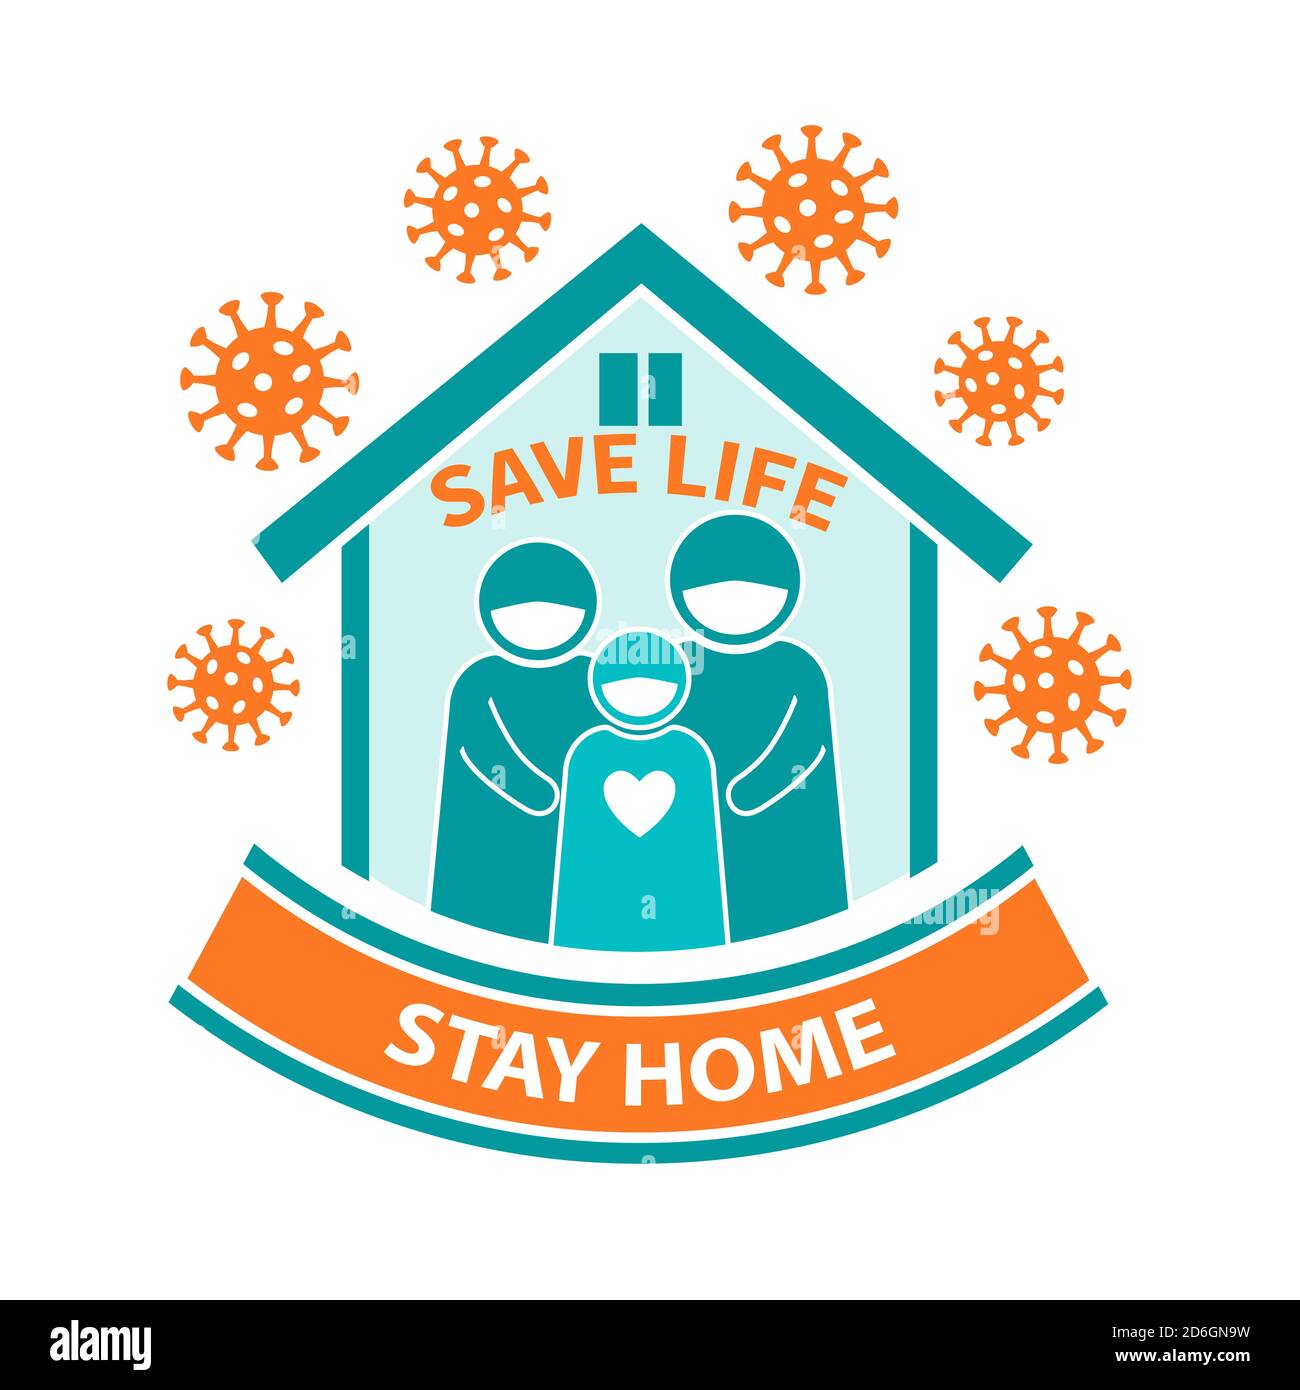 Stay home save life coronavirus quarantine icon. Prevention spread virus and safety sign. Family  self-isolated during the epidemic Сovid-19. Vector Stock Vector